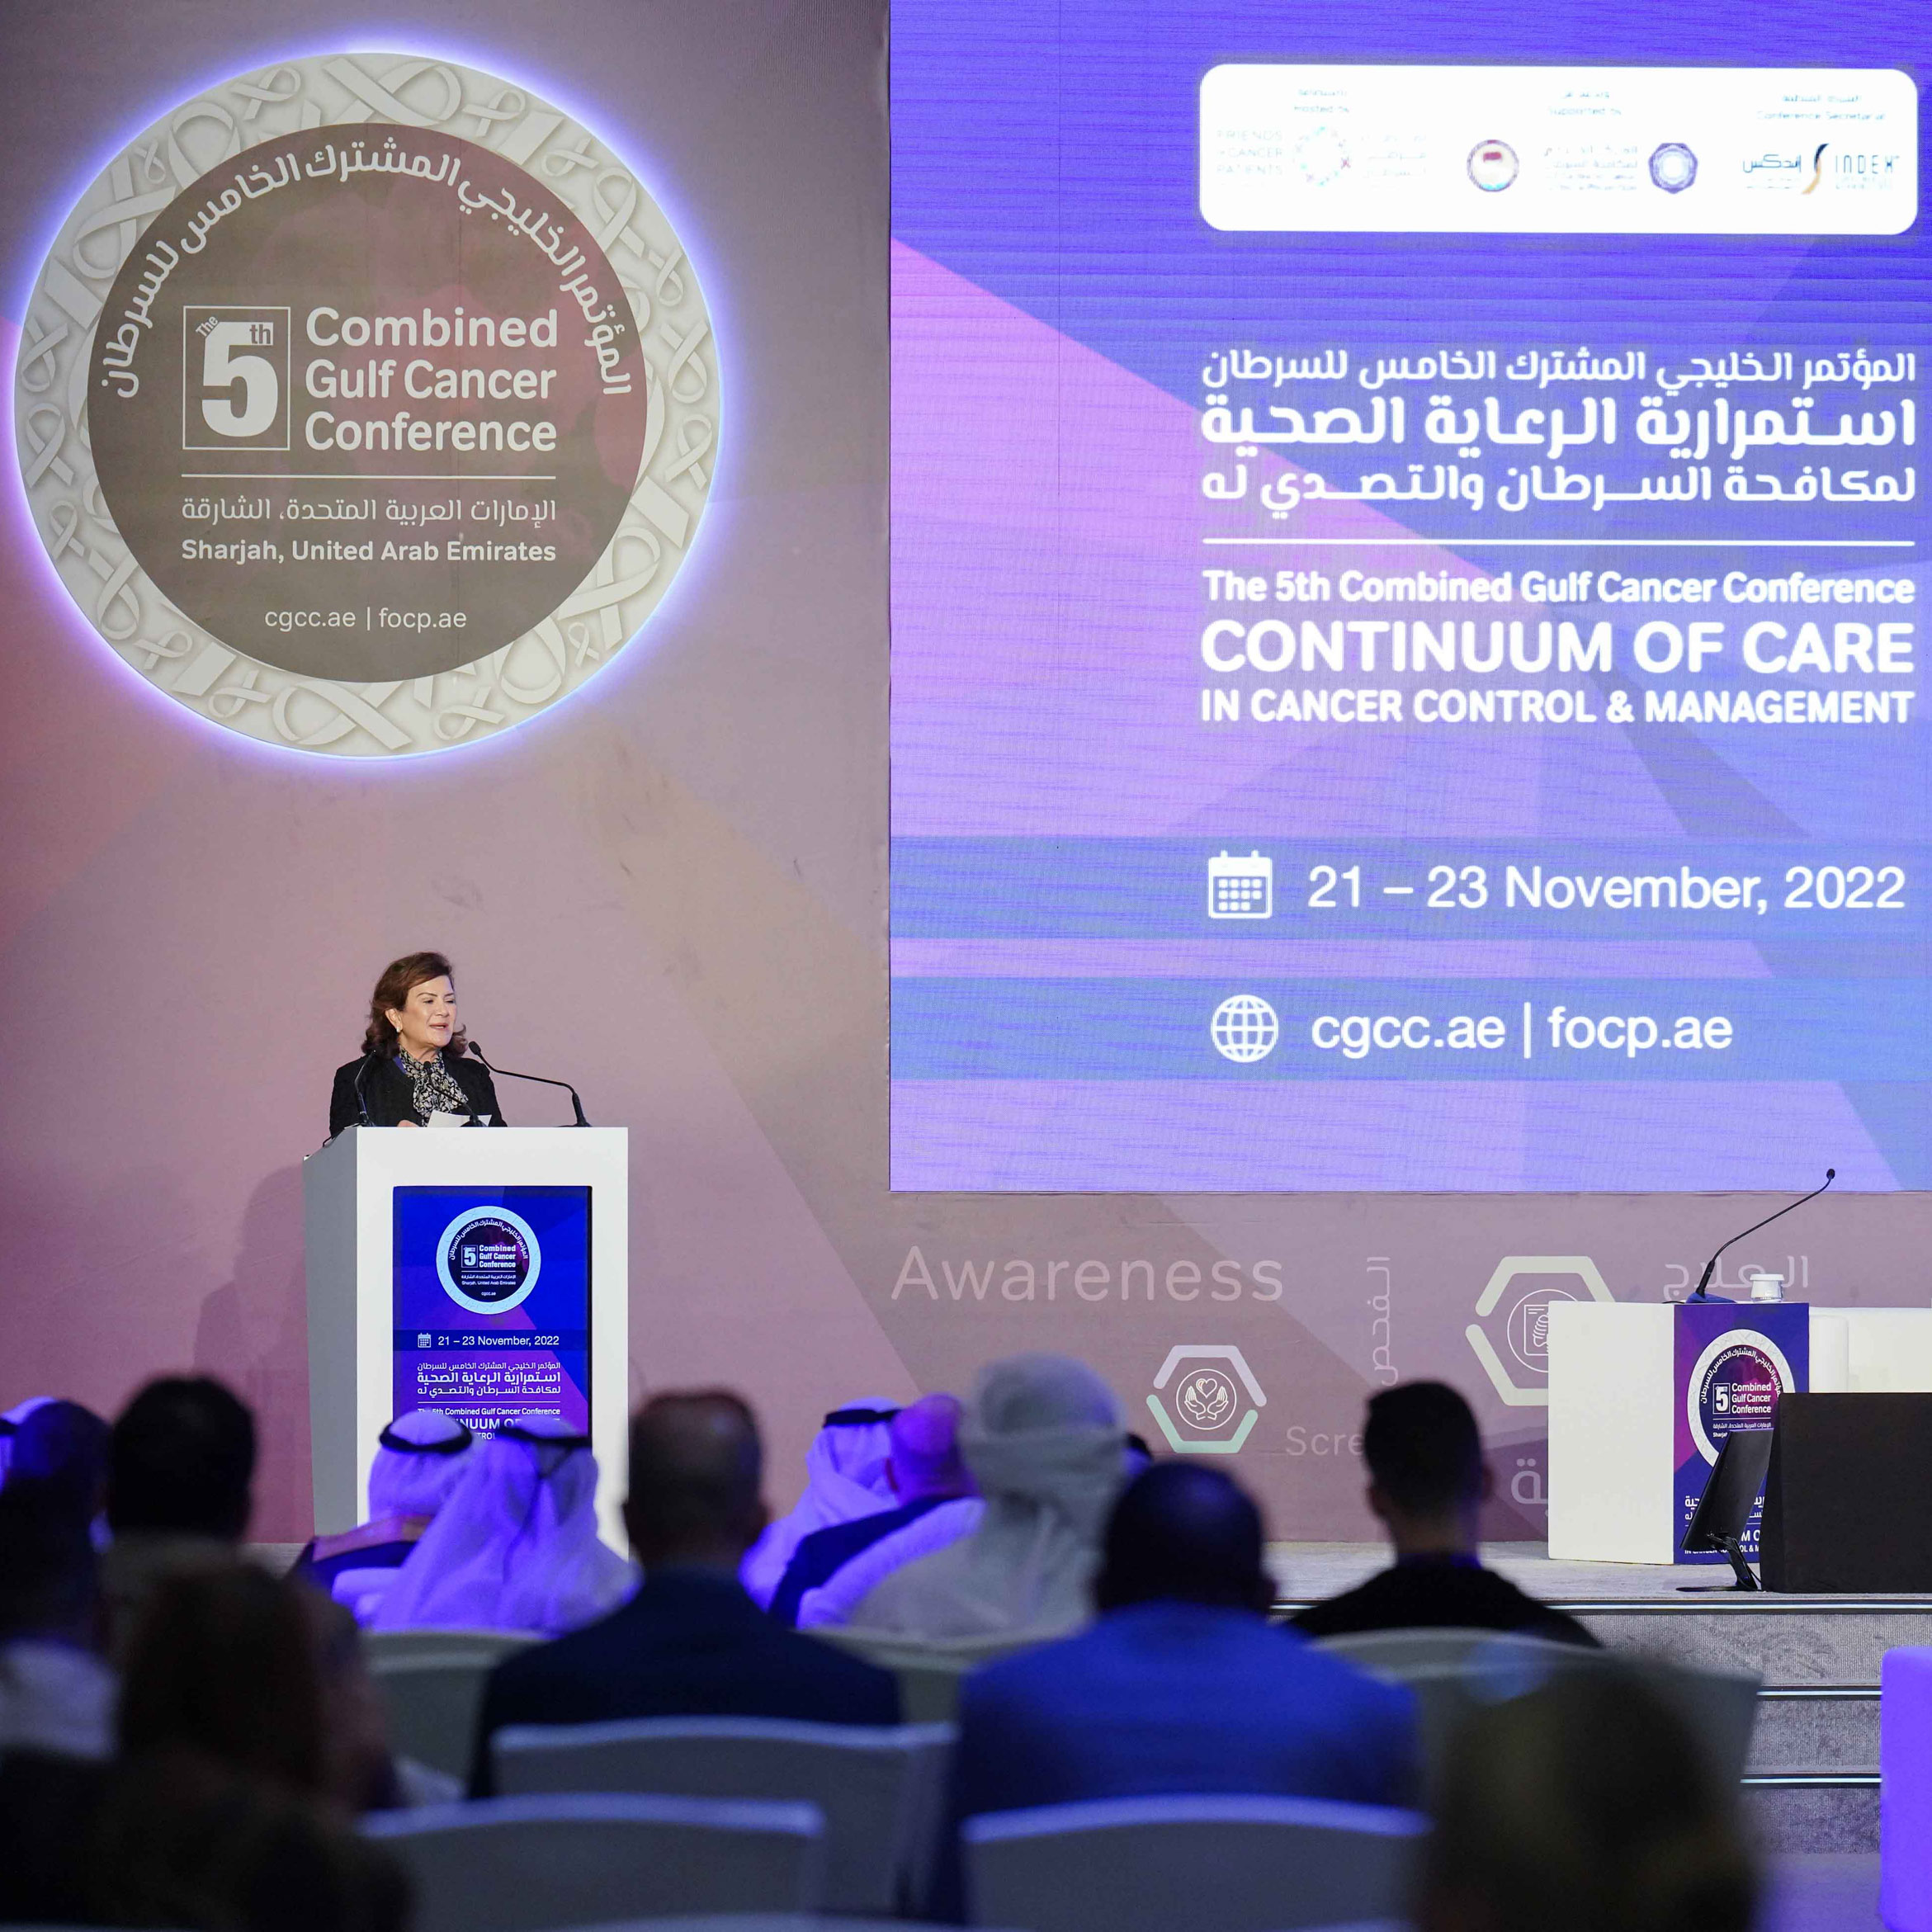 The 5th Combined Gulf Cancer Conference